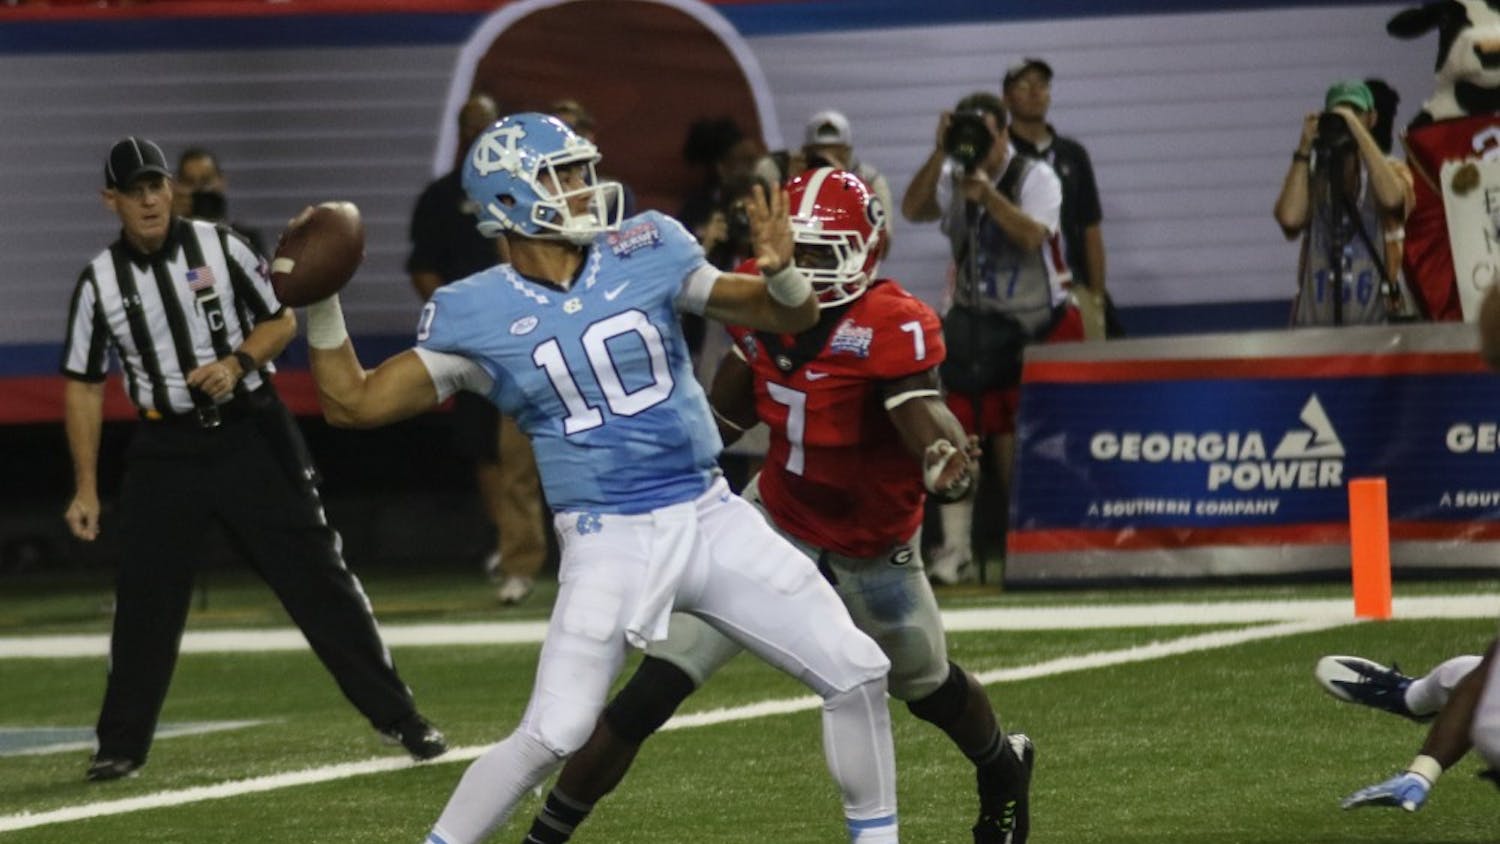 UNC quarterback Mitch Trubisky (10) prepares to unload a deep pass while being pressured by Georgia outside line backer Lorenzo Carter (7).&nbsp;The Tar Heels fell to the Bulldogs 33-24 on Saturday in Atlanta.